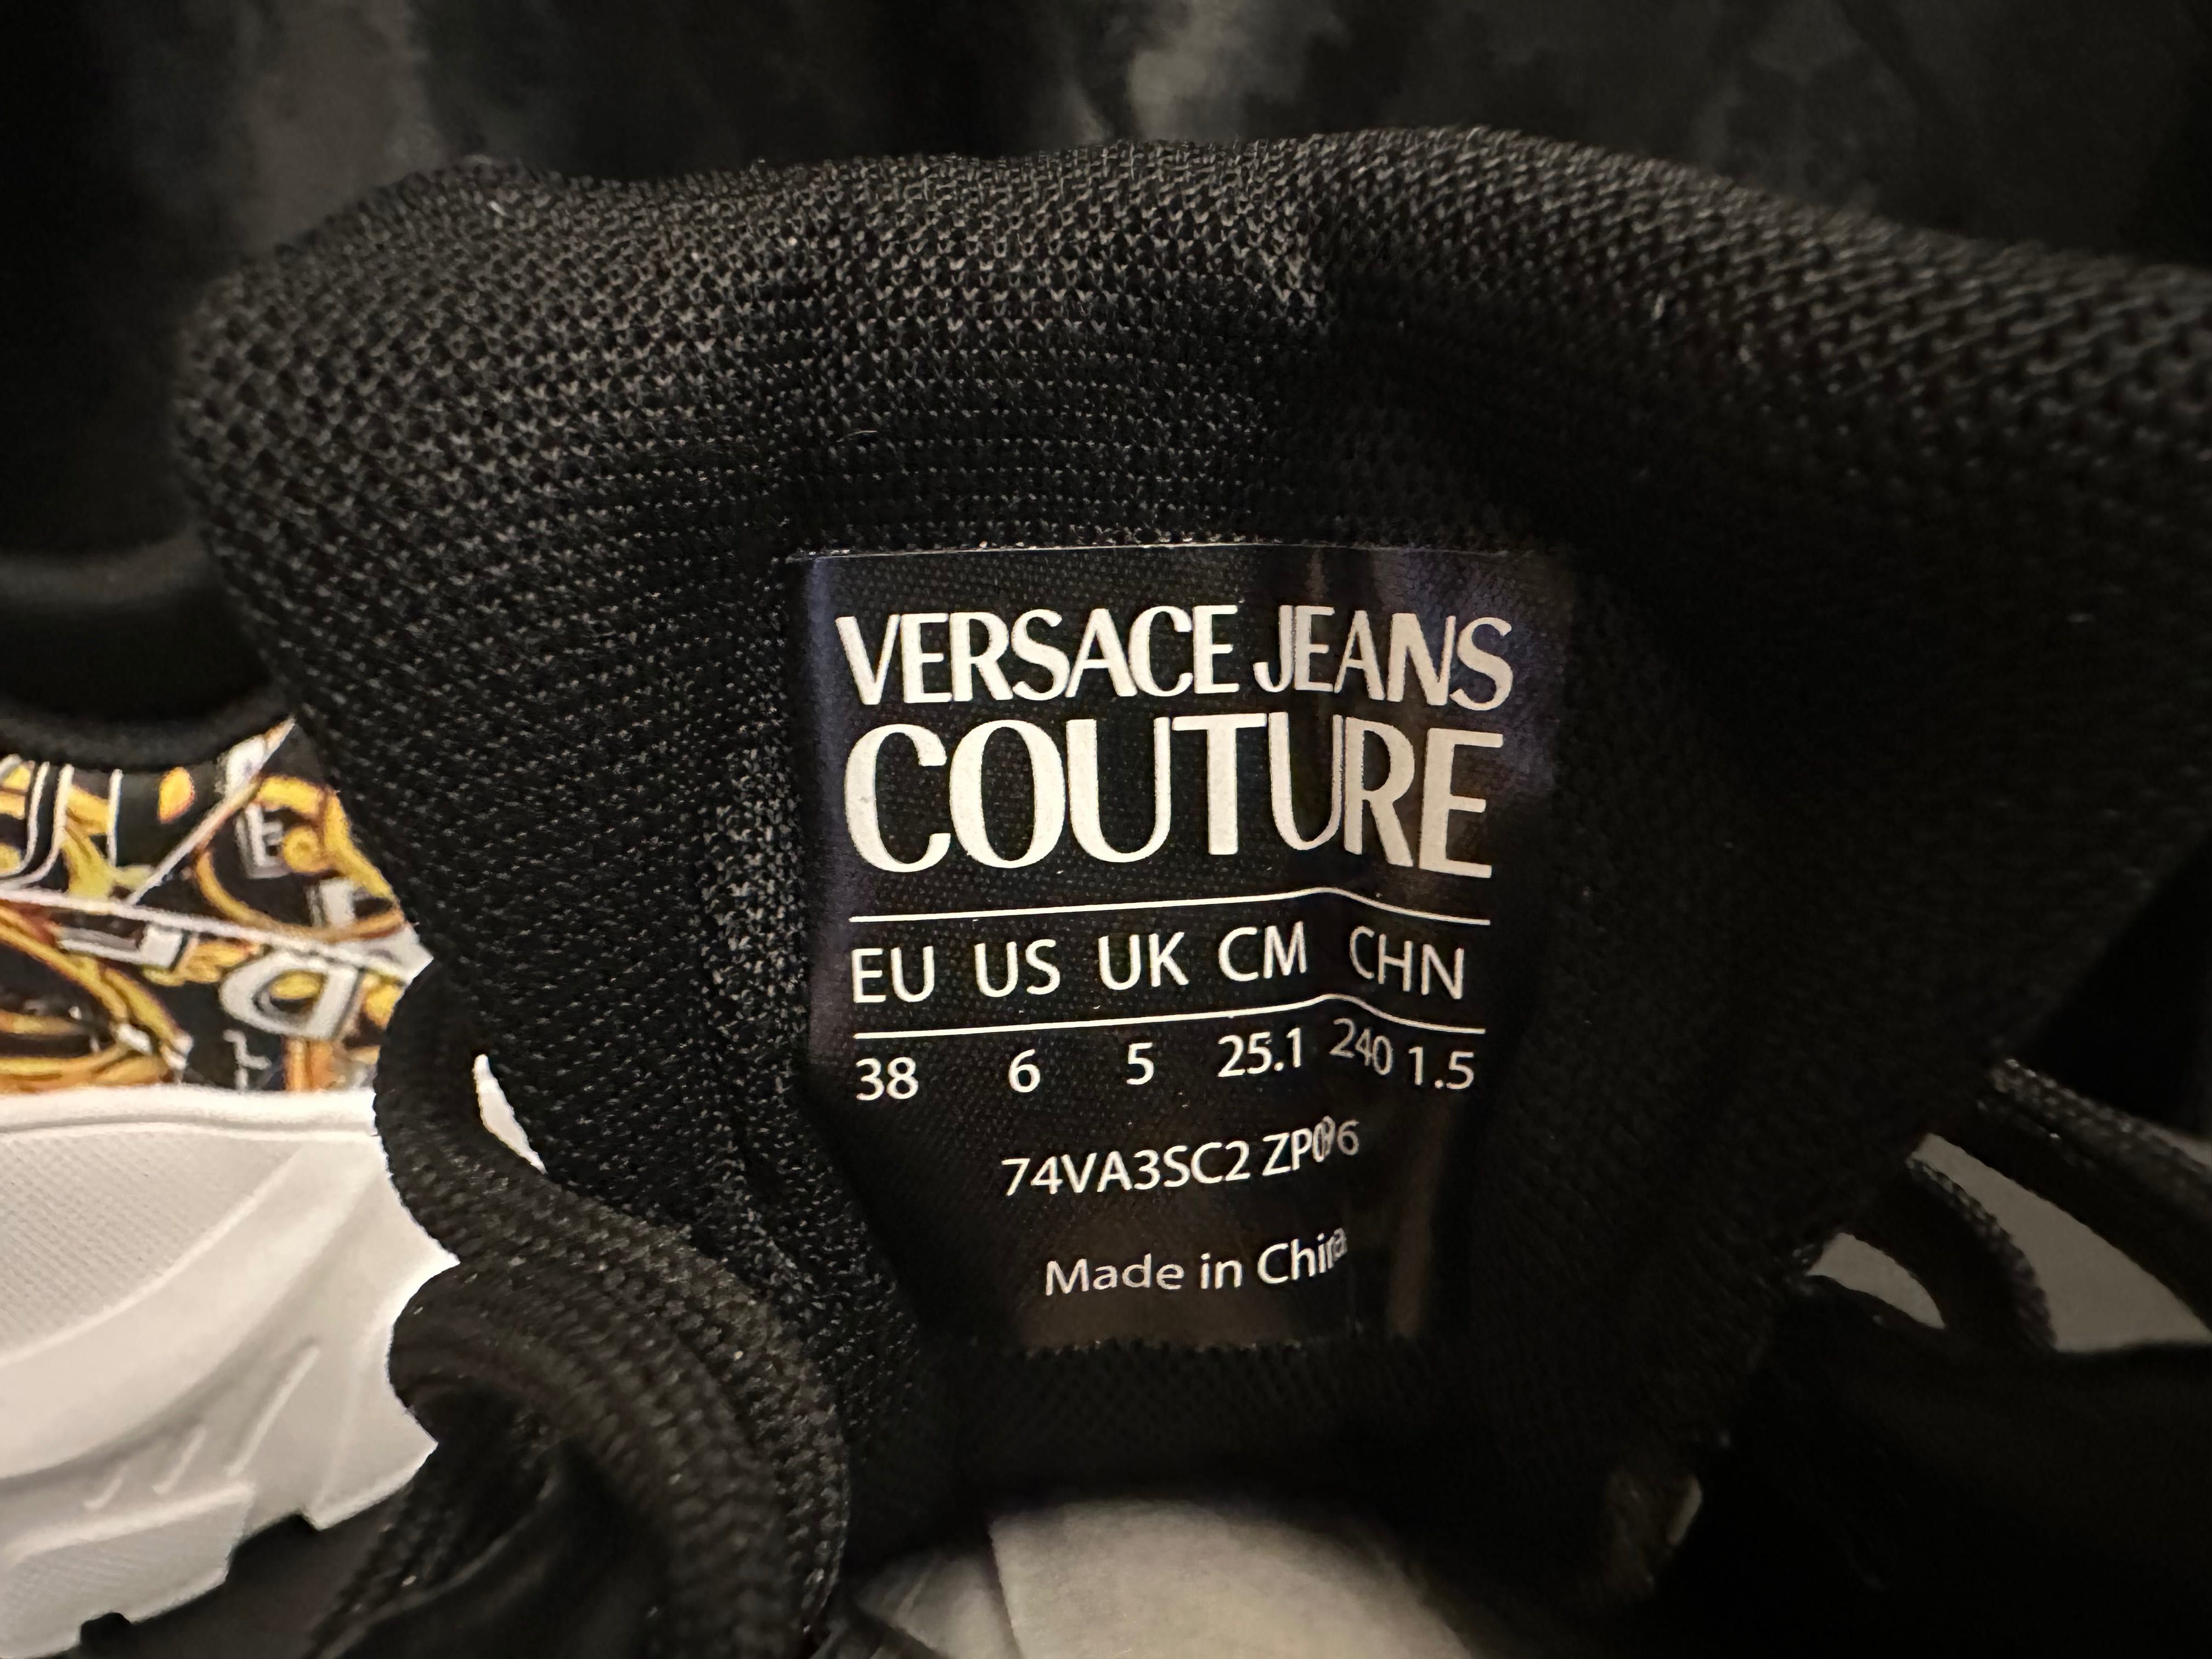 Versace jeans couture 38